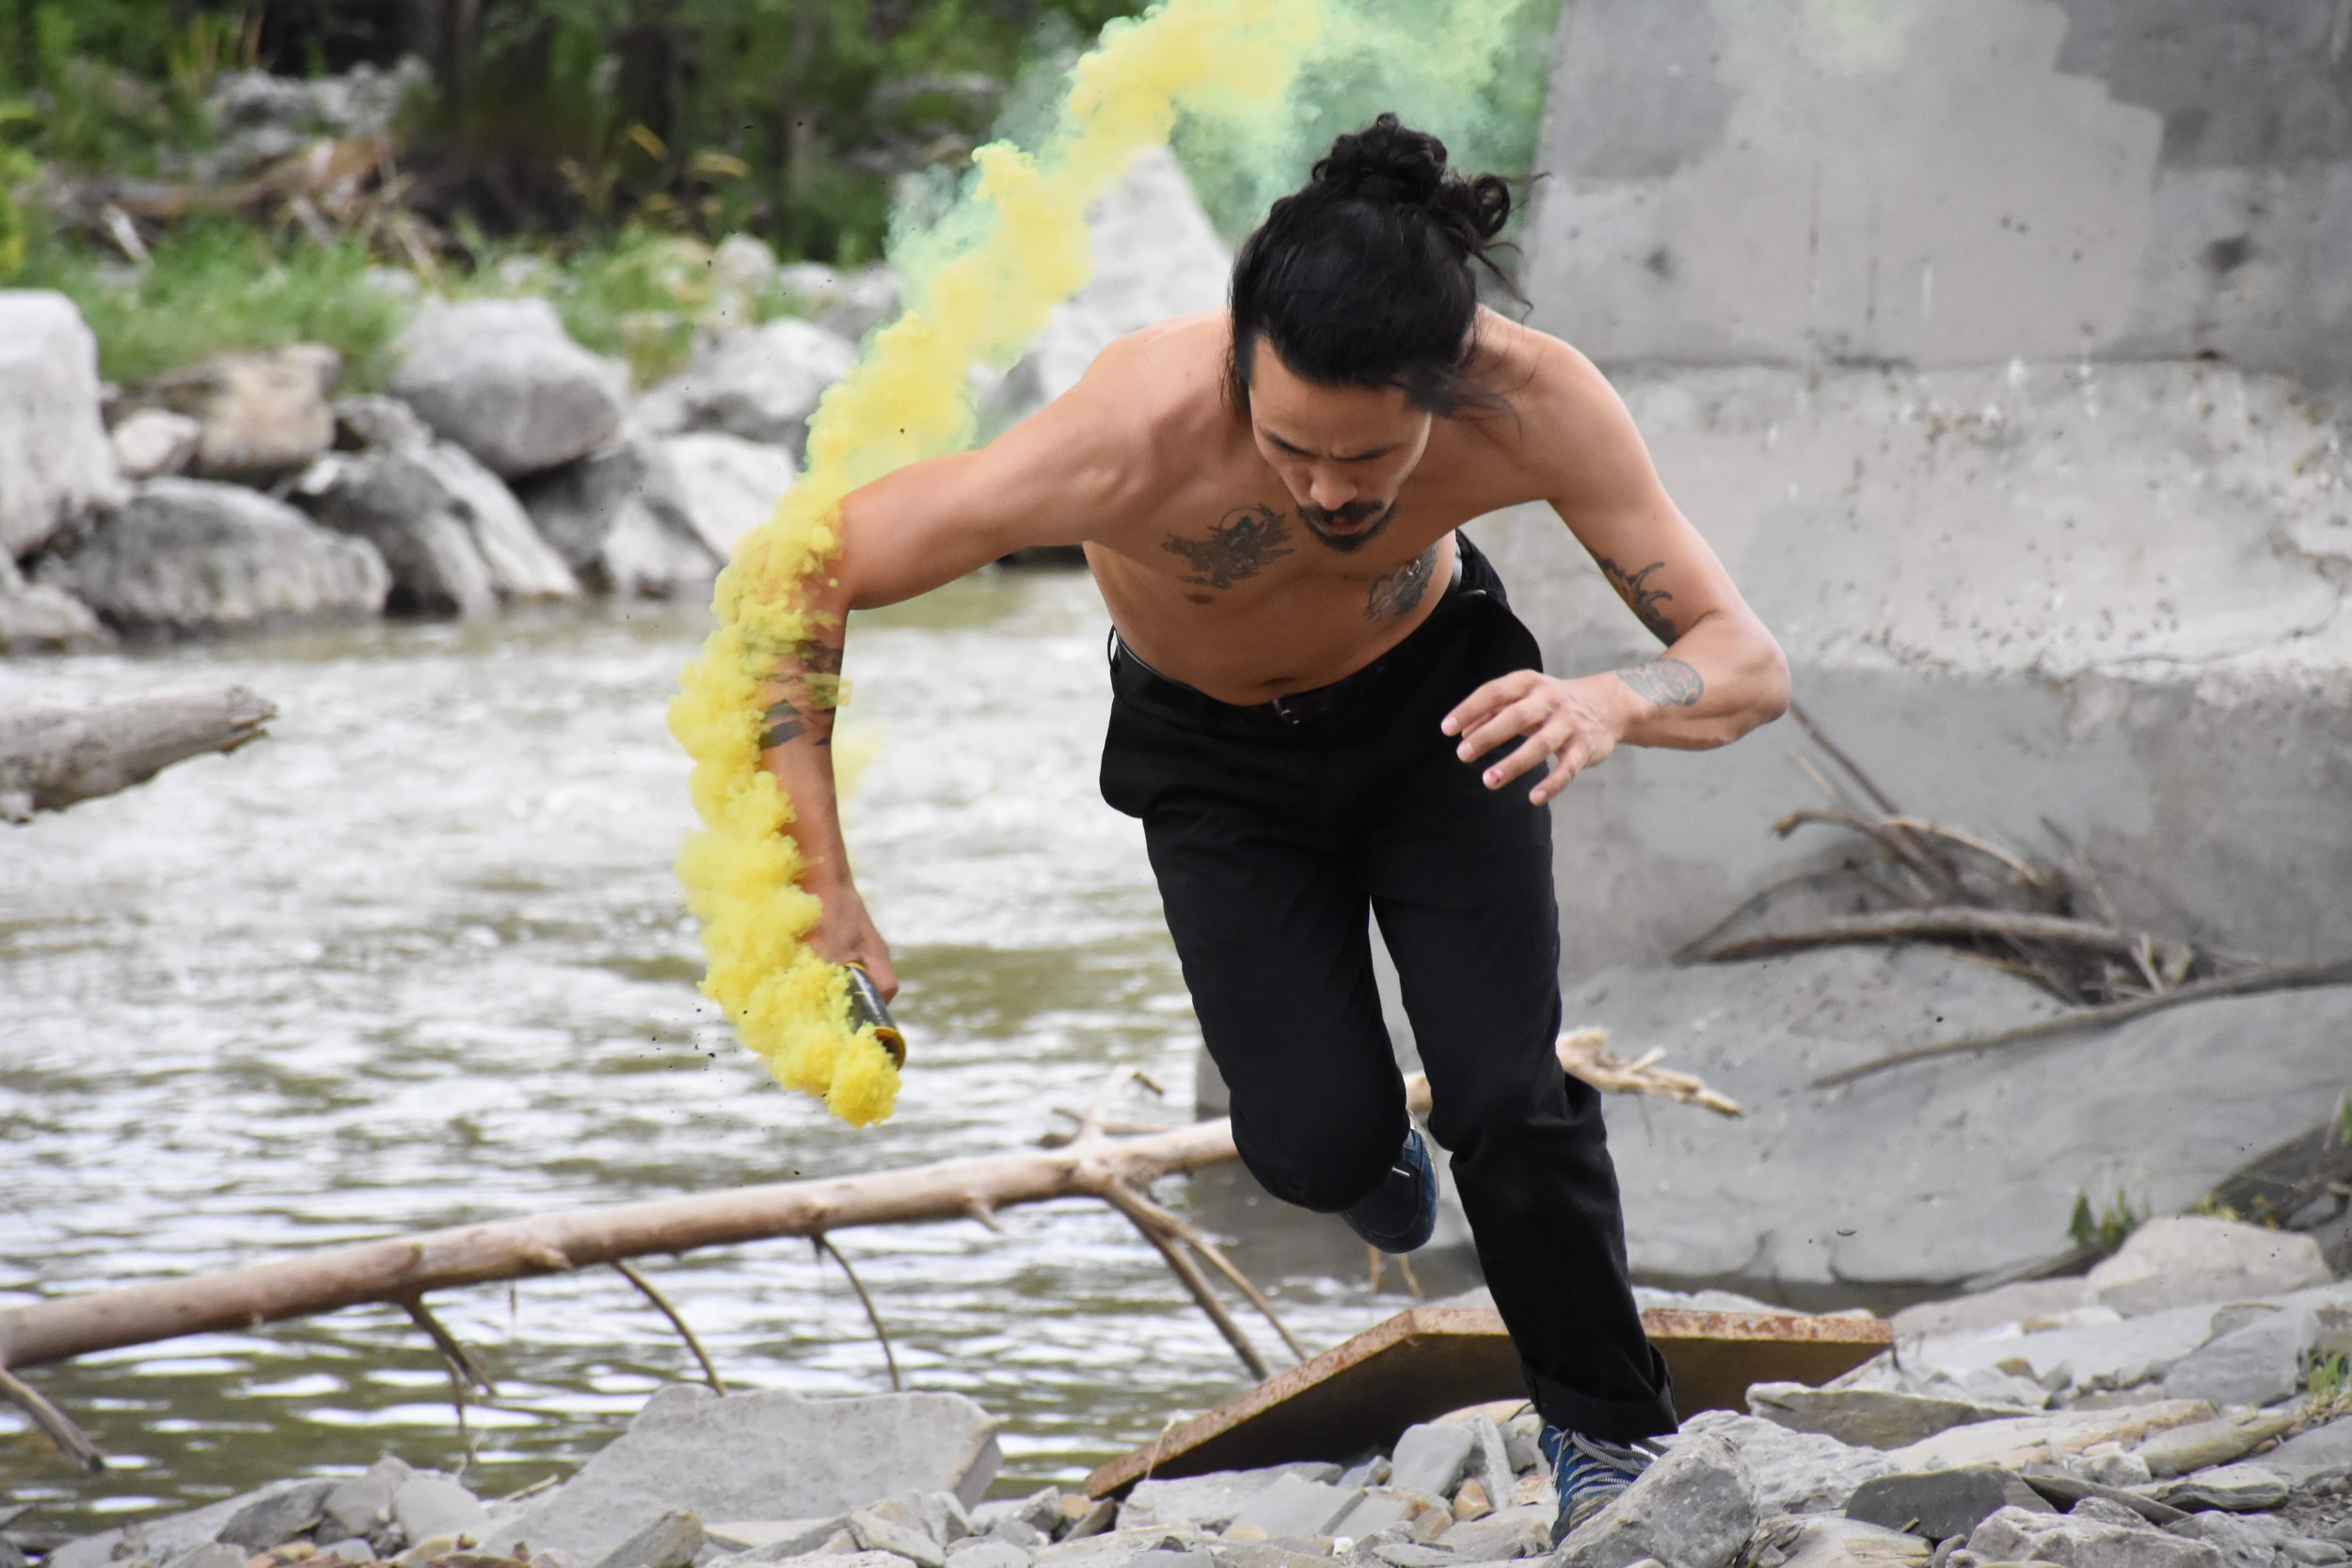 A dancer runs beside a river, holding something that emits yellow smoke.